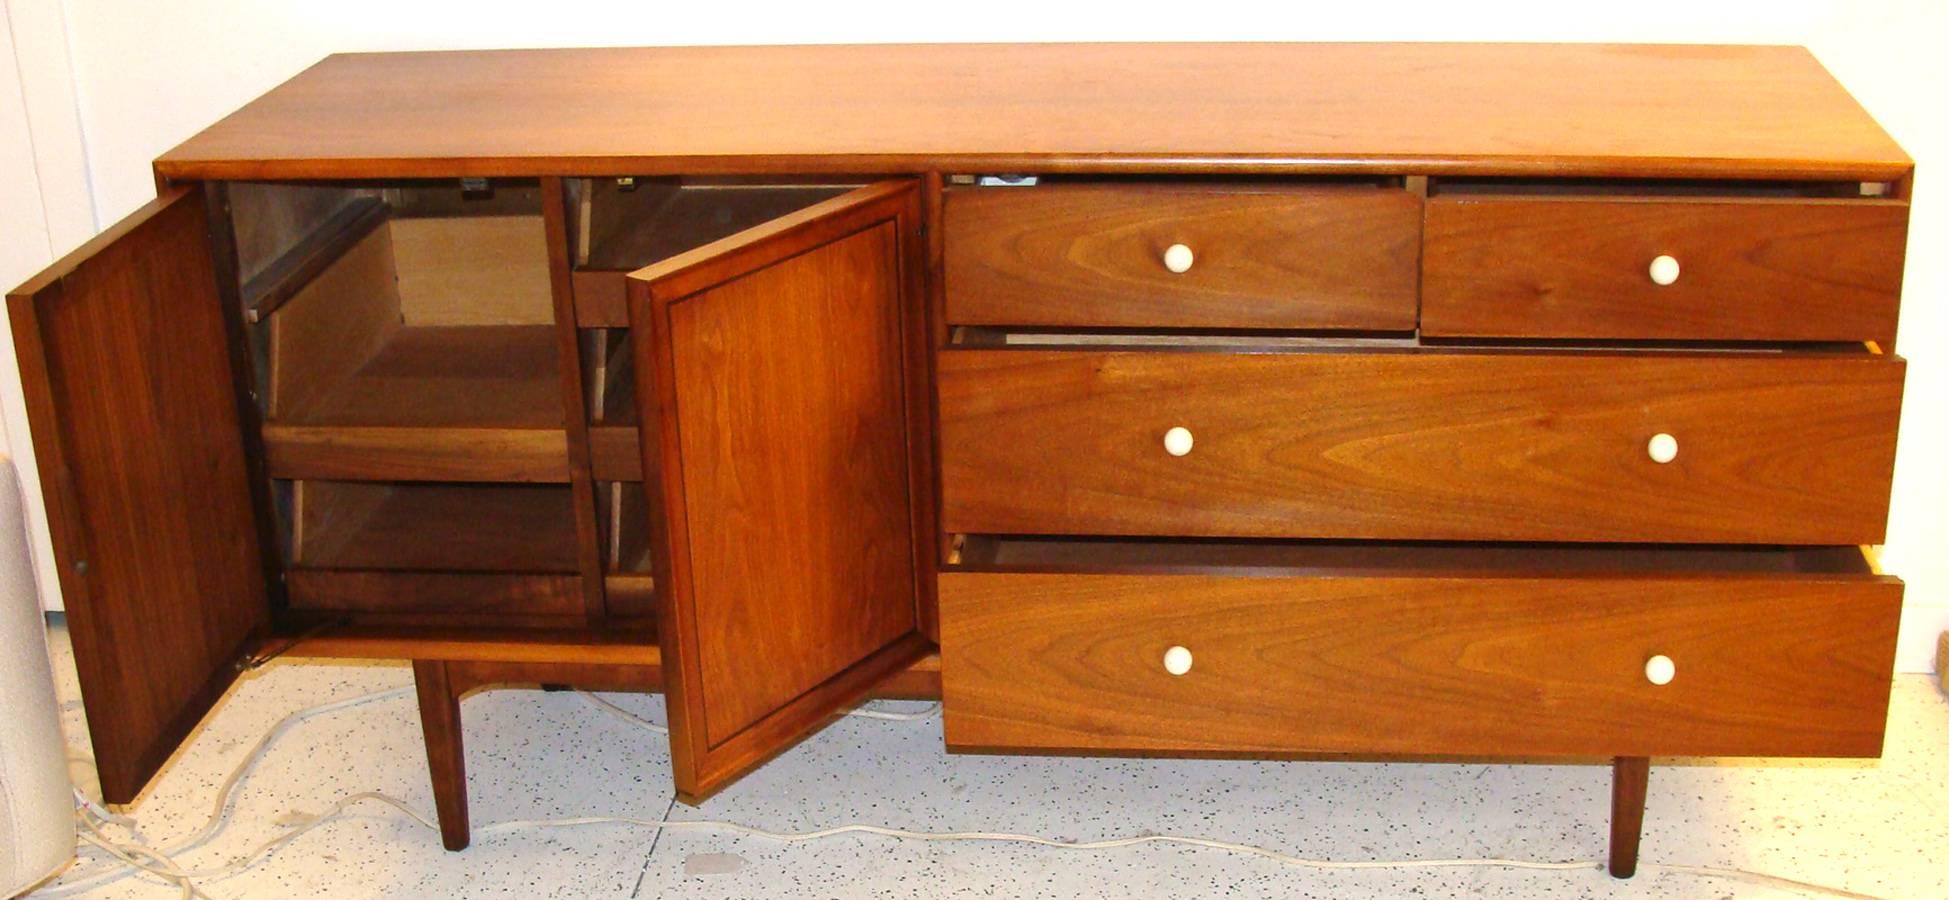 Perfectly proportioned midcentury dresser, credenza or cabinet designed by Kipp Stewart and Stewart McDougall for Drexel as part of the 